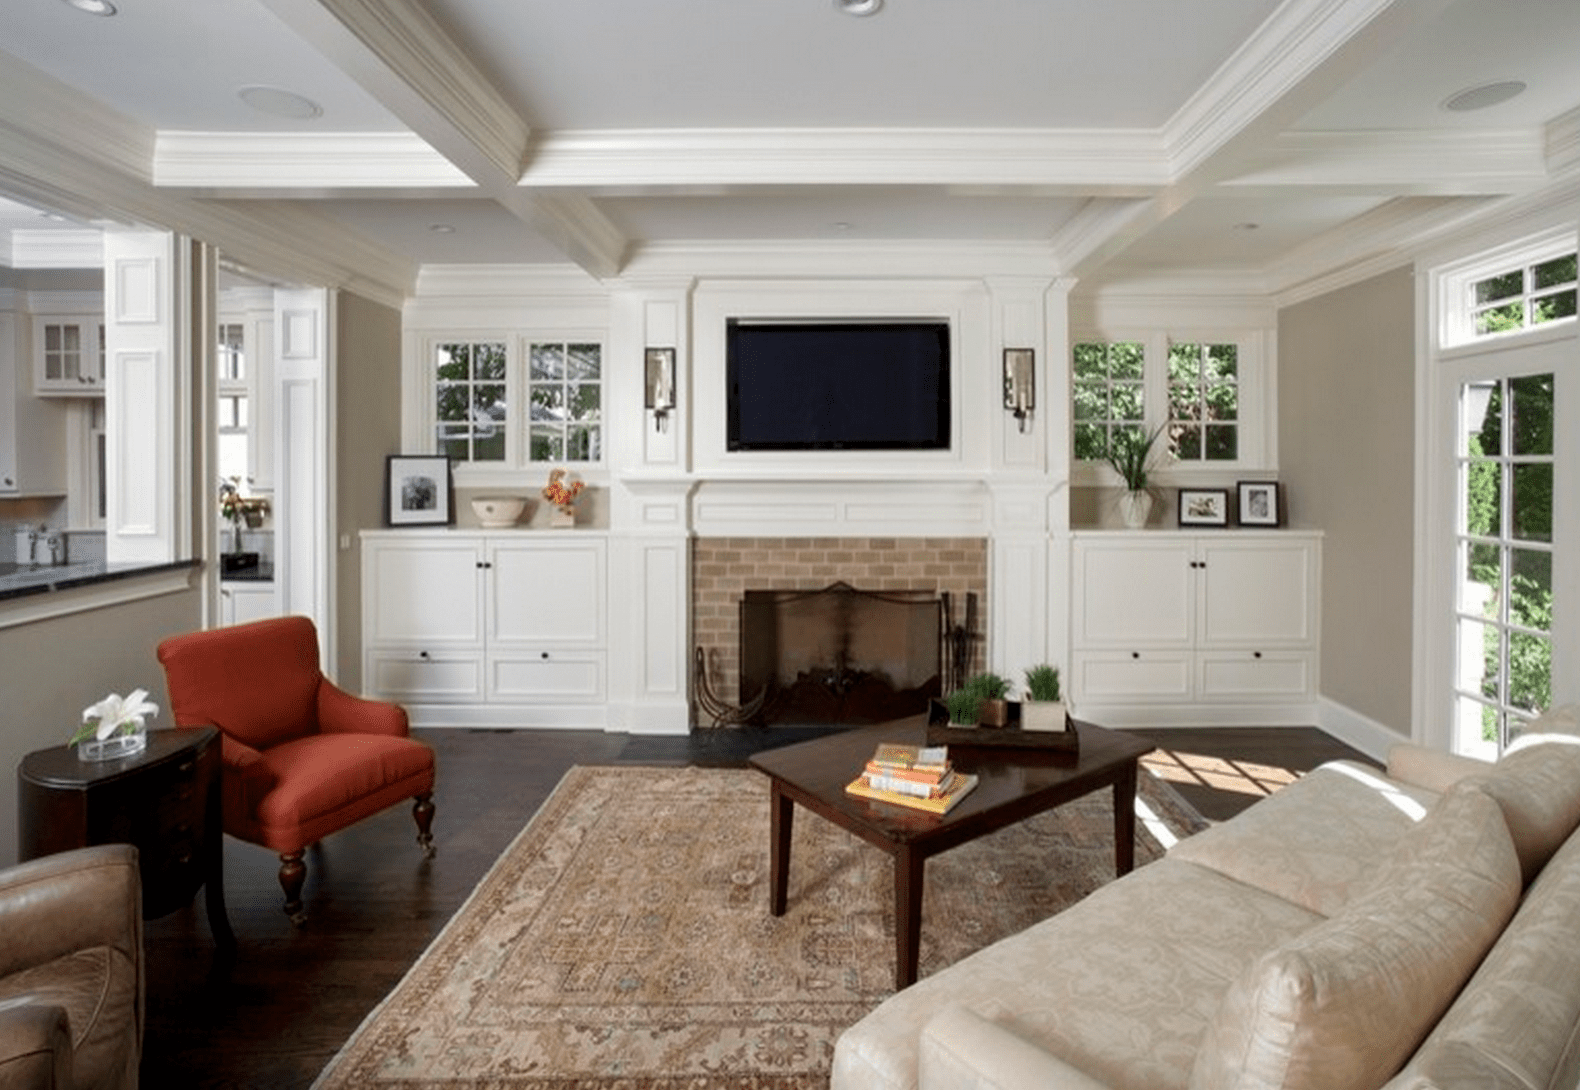 Fireplace with Windows On Both Sides Luxury Beautiful Living Rooms with Built In Shelving